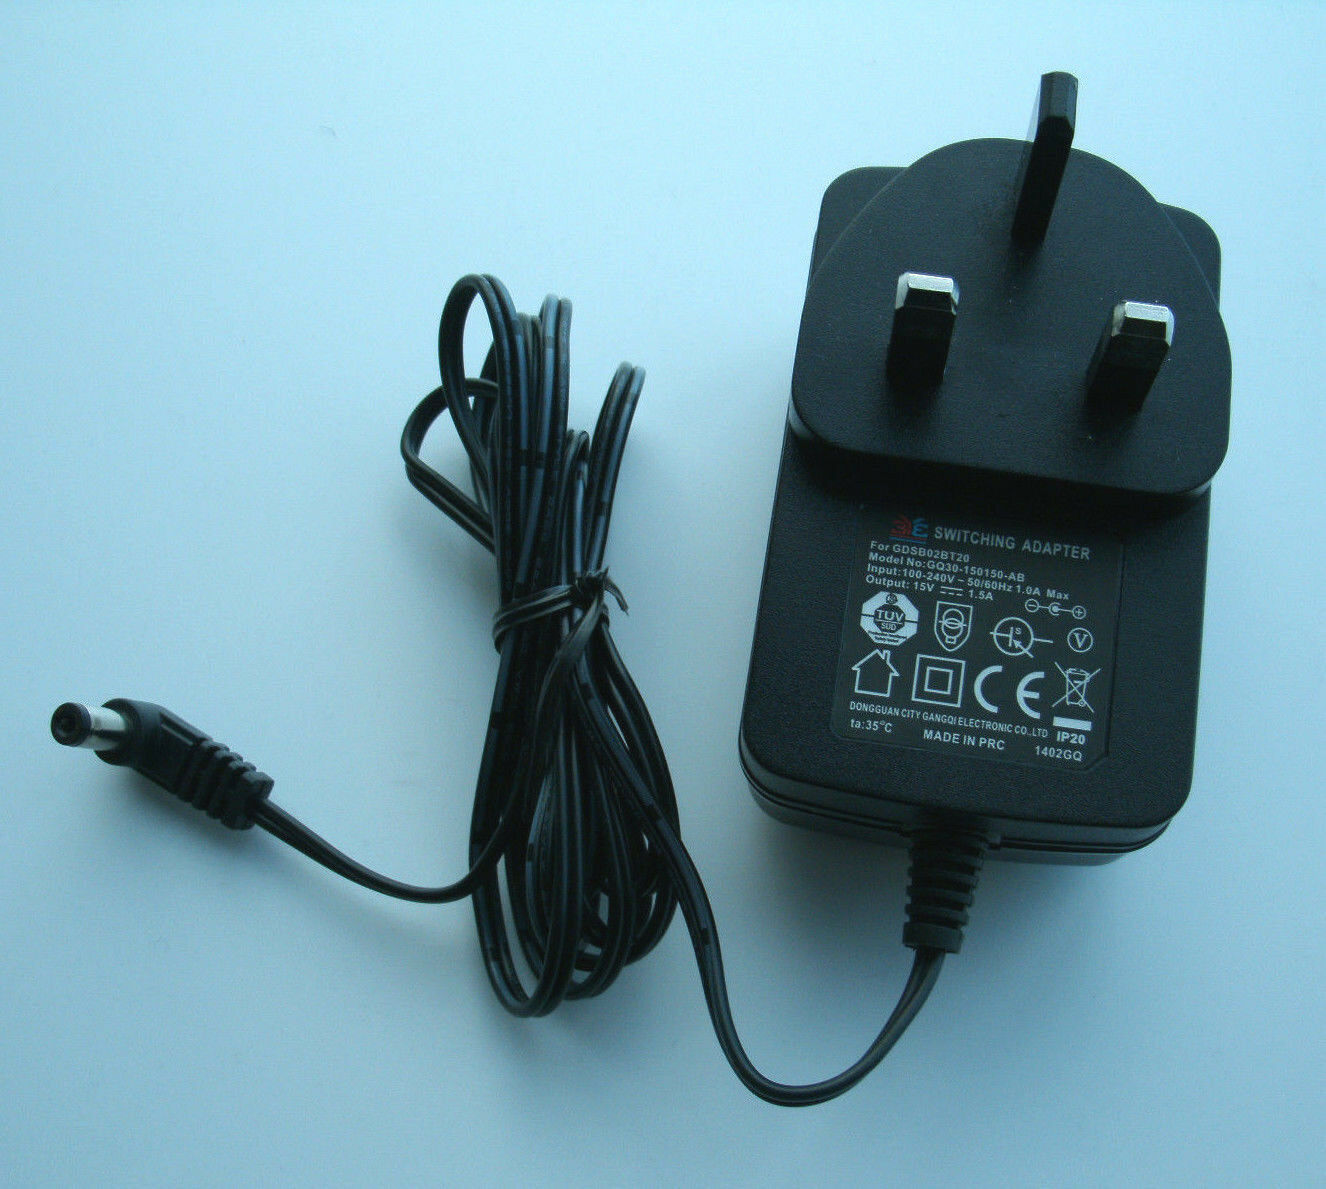 15V 1.5A GDSB02BT2 BRAND NEW 3Y3 GQ30-150150-AB GDSB02BT20 SWITCHING ADAPTER 22.5w UK USA PLUG Type: AC/DC Adapter Br - Click Image to Close